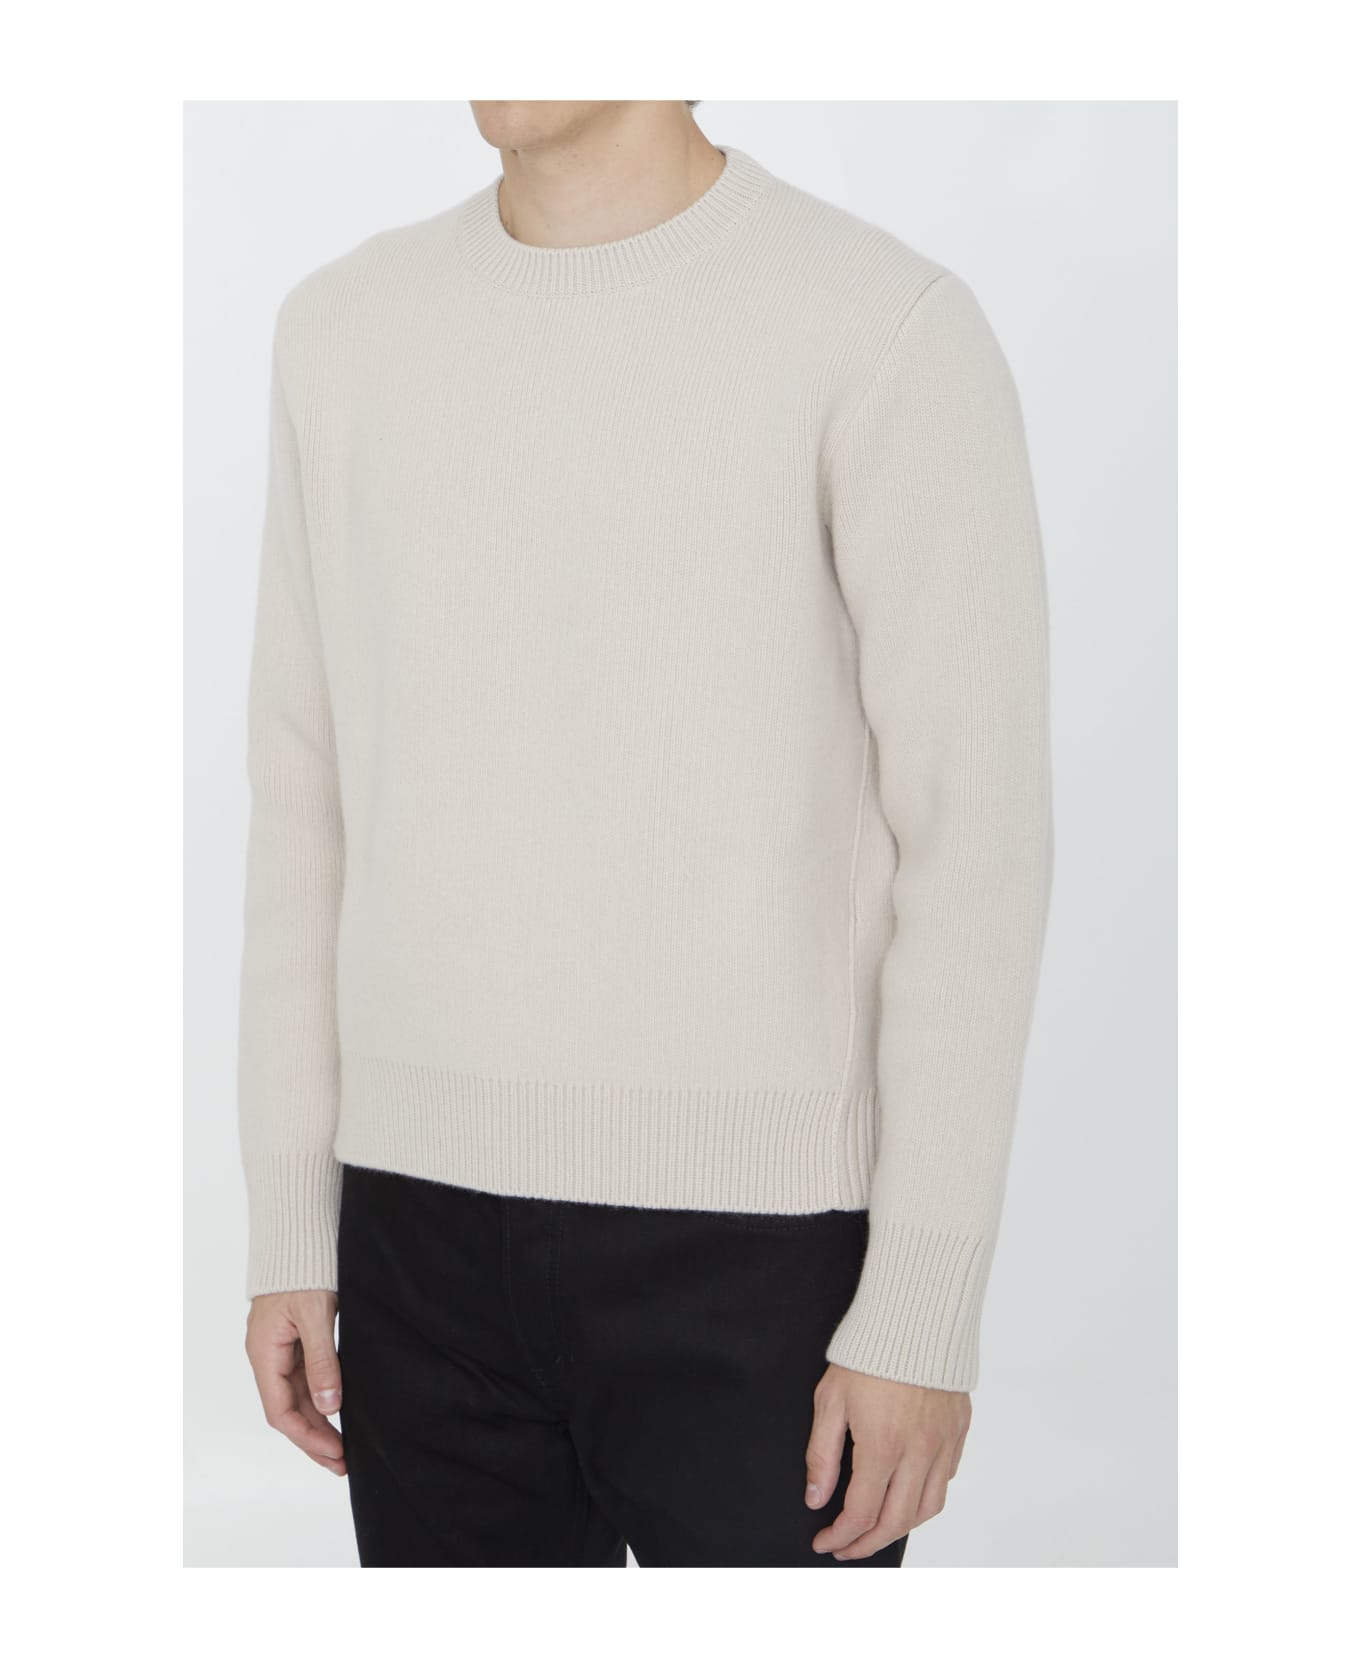 Lanvin Wool And Cashmere Sweater - PAPER ニットウェア